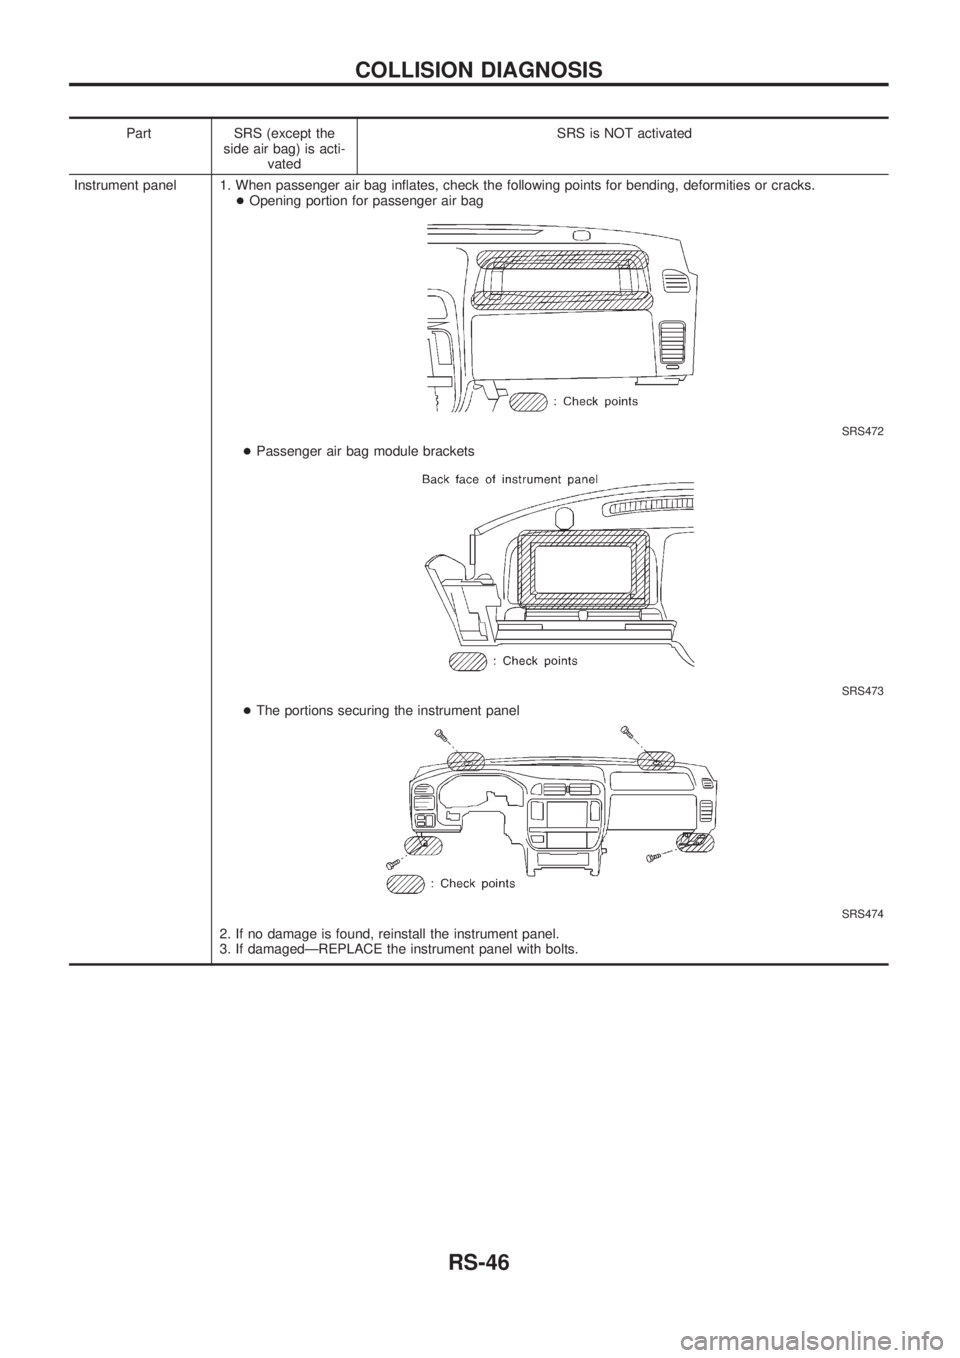 NISSAN PATROL 2006 Owners Guide Part SRS (except the
side air bag) is acti-
vatedSRS is NOT activated
Instrument panel 1. When passenger air bag in¯ates, check the following points for bending, deformities or cracks.
+Opening porti